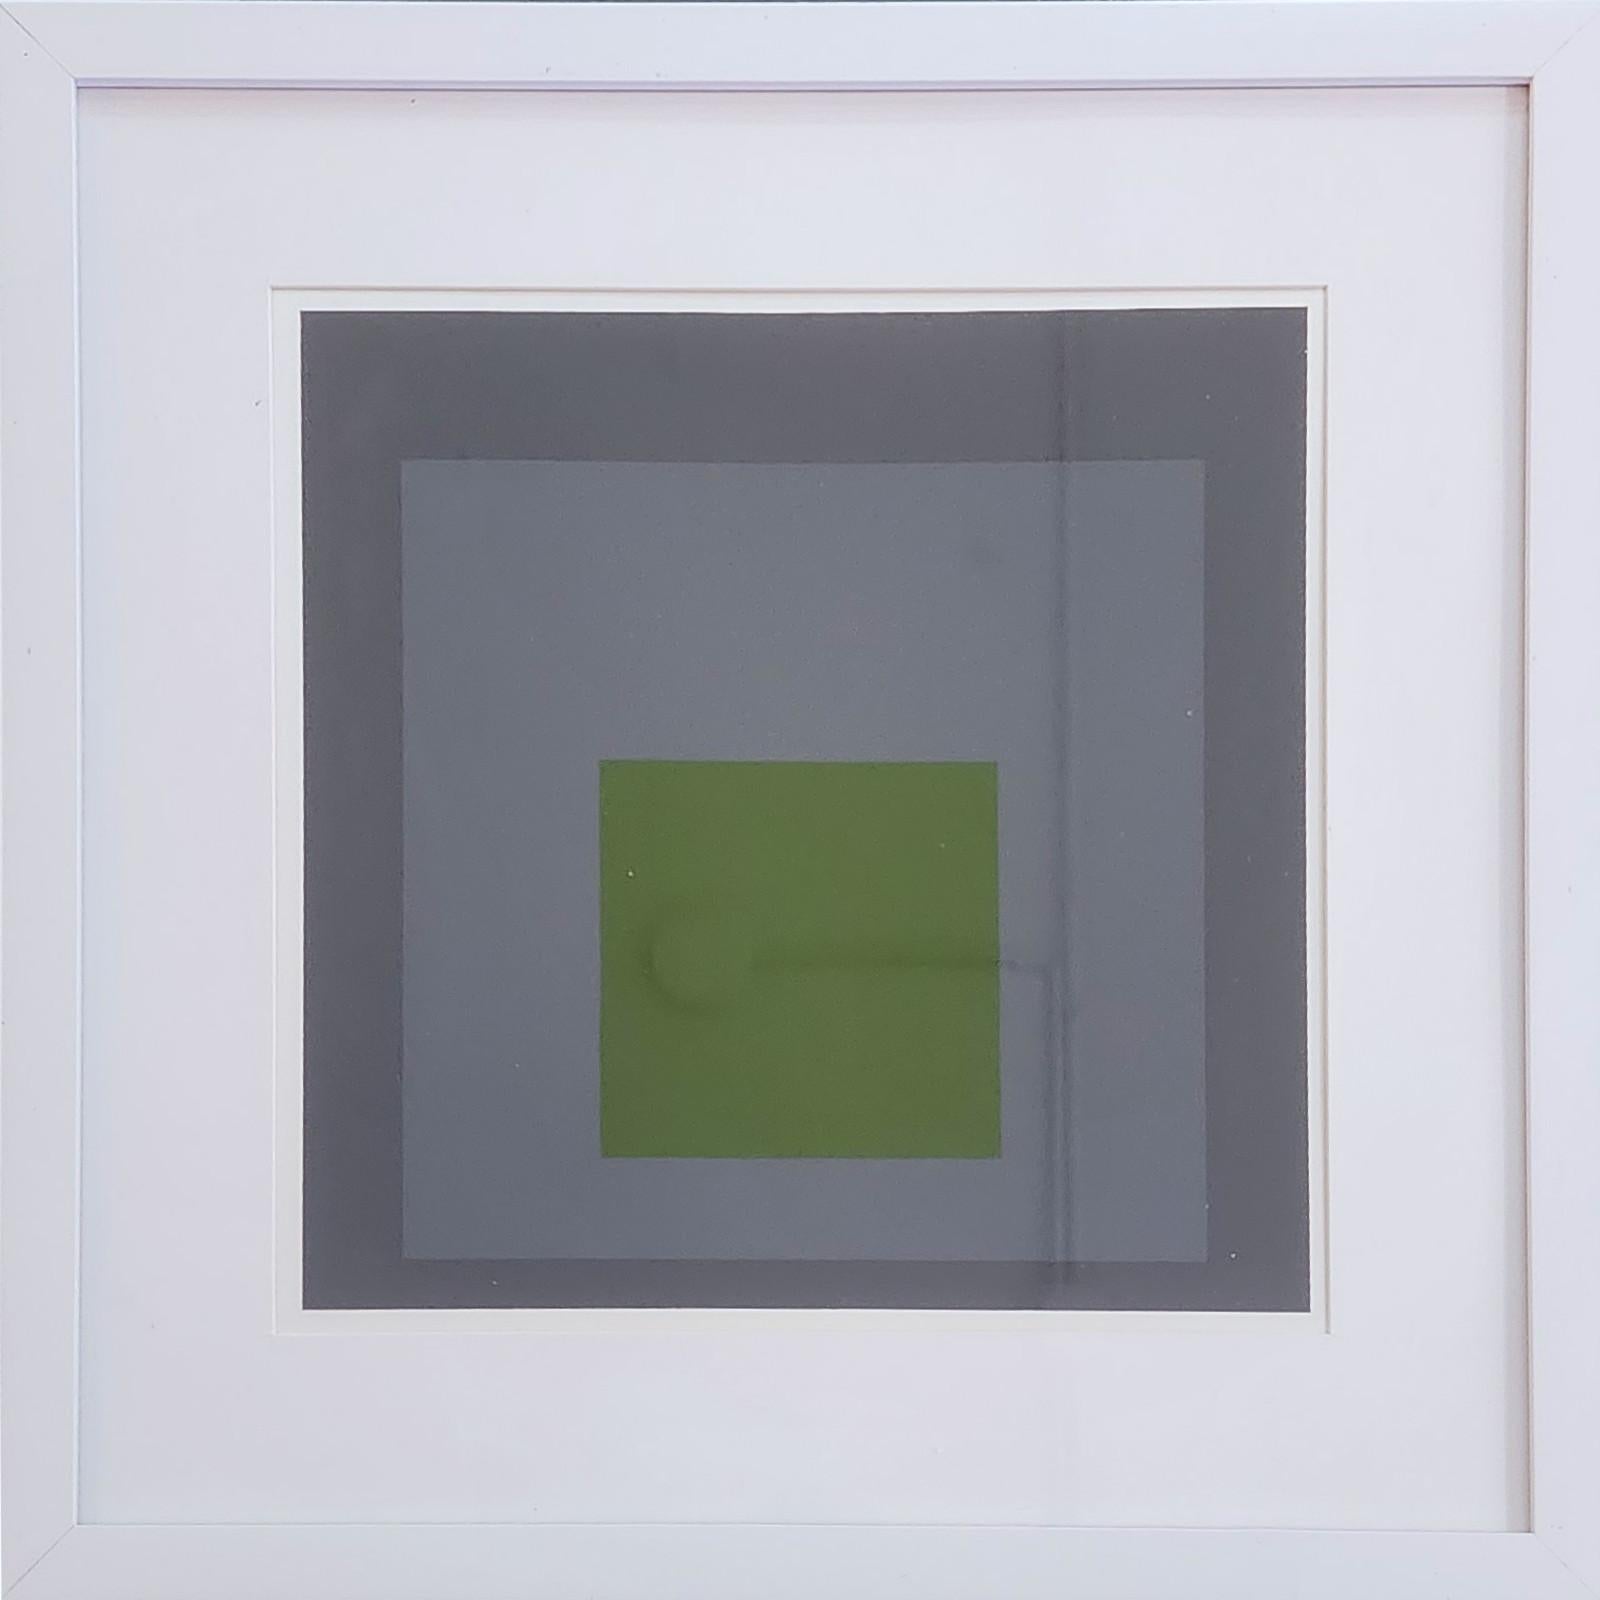 Homage to the Square: Thaw (Bauhaus, Minimalism, 50% OFF LIST PRICE) - Abstract Geometric Print by (after) Josef Albers